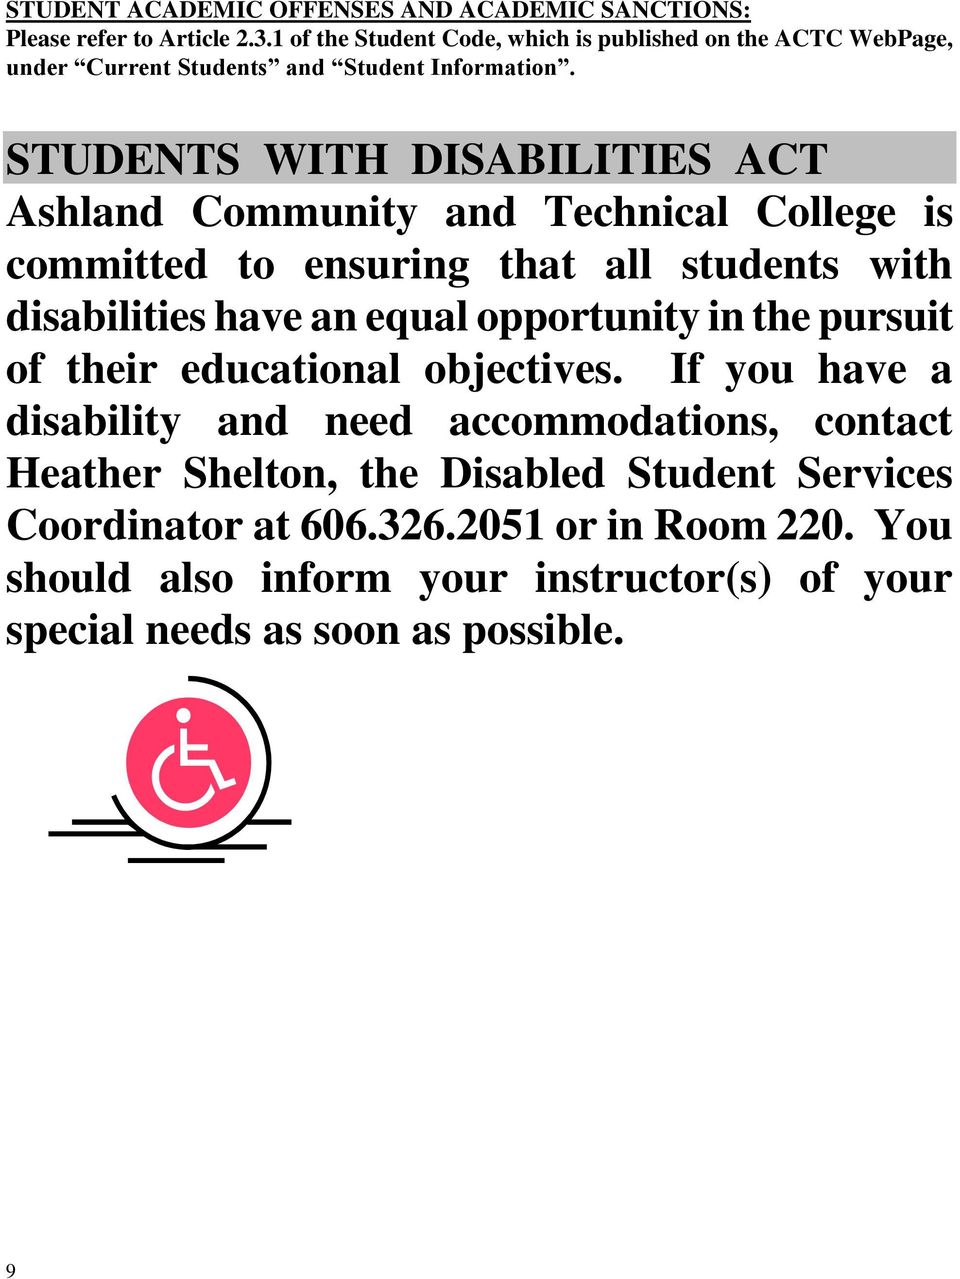 STUDENTS WITH DISABILITIES ACT Ashland Community and Technical College is committed to ensuring that all students with disabilities have an equal opportunity